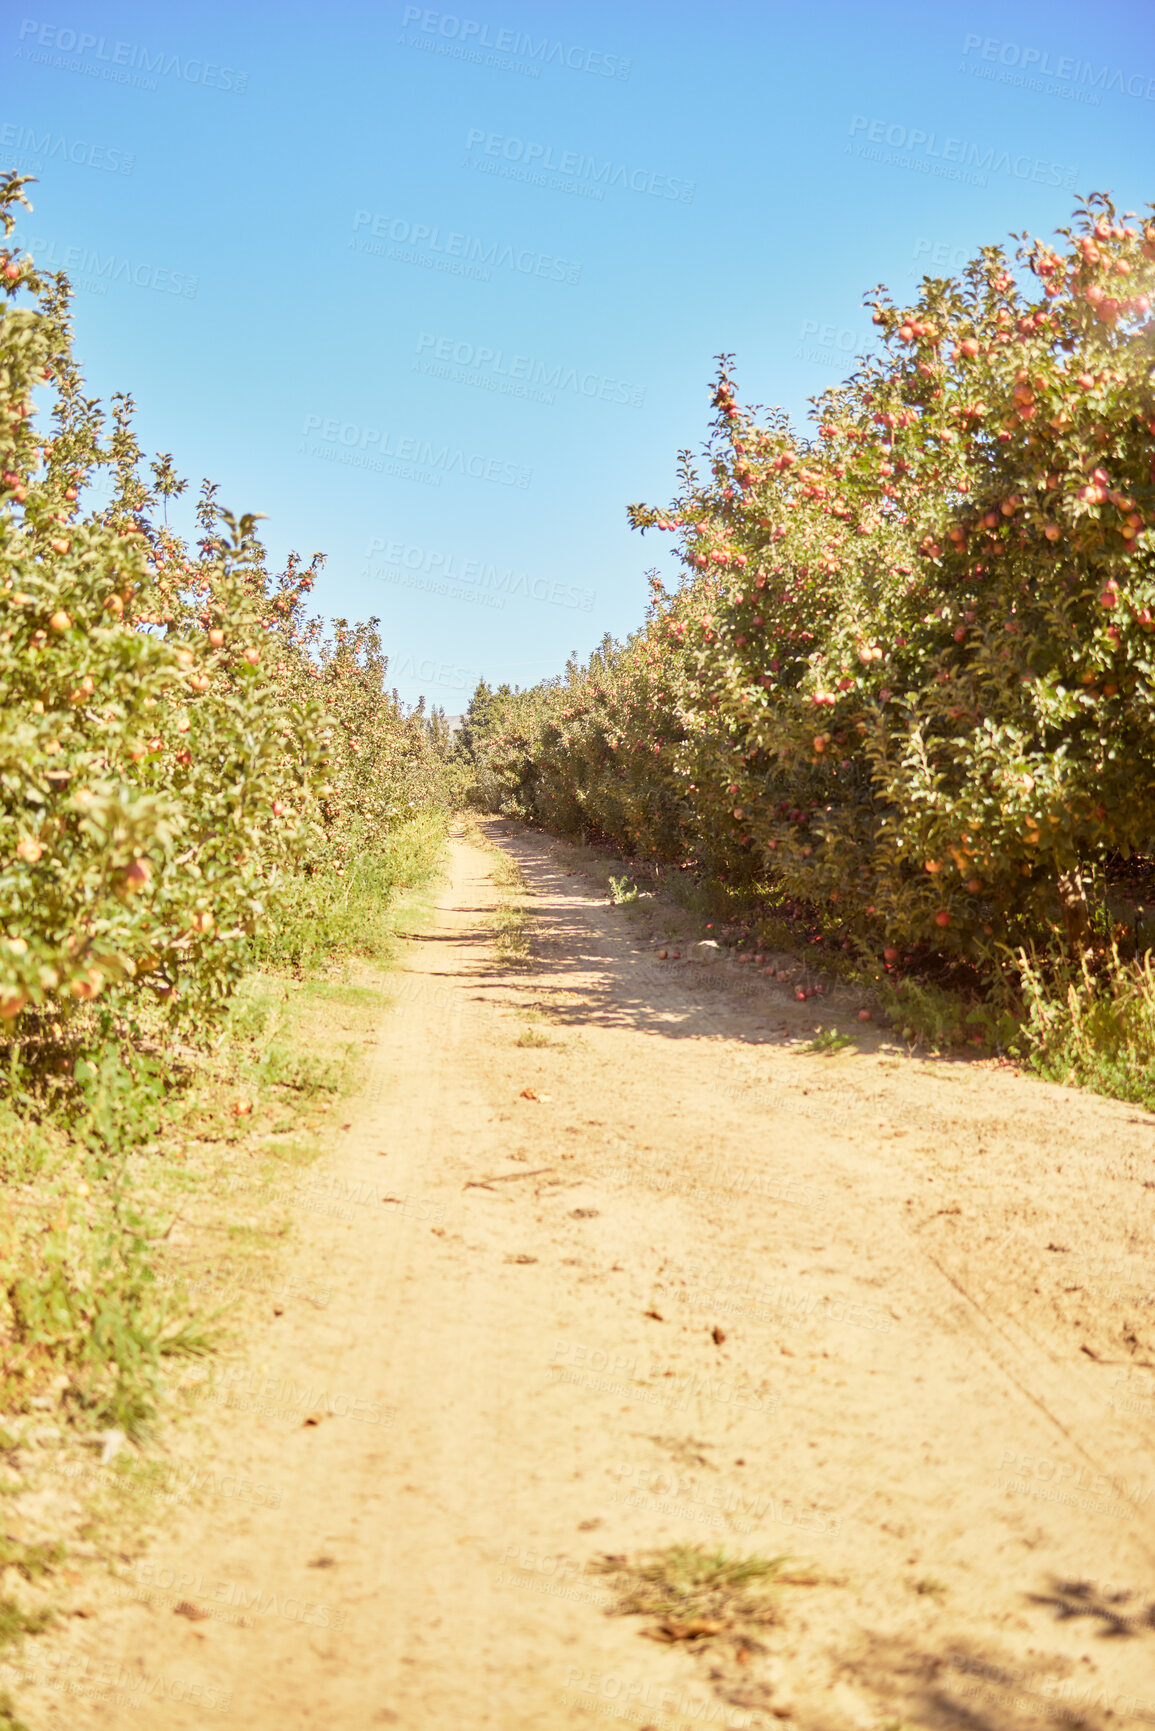 Buy stock photo Orchard, trees and path in apple farm for agriculture, farming and natural produce industry. A dirt road through sustainable apple orchard with organic fruit growing on tree, ready for harvest